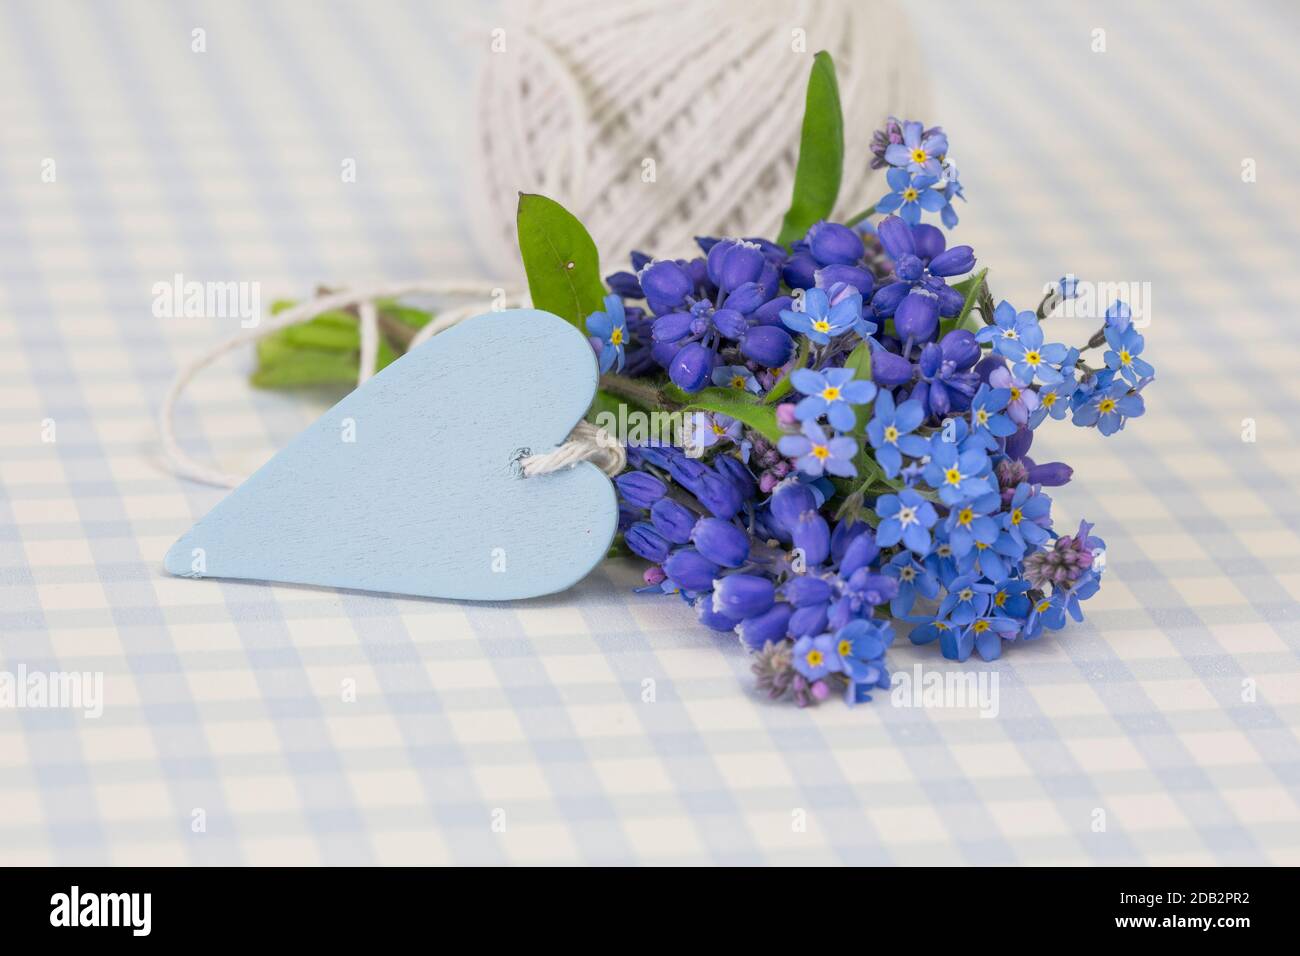 Forget Me Not, Small Flowers In The Shape Of A Heart Stock Photo, Picture  and Royalty Free Image. Image 8171167.